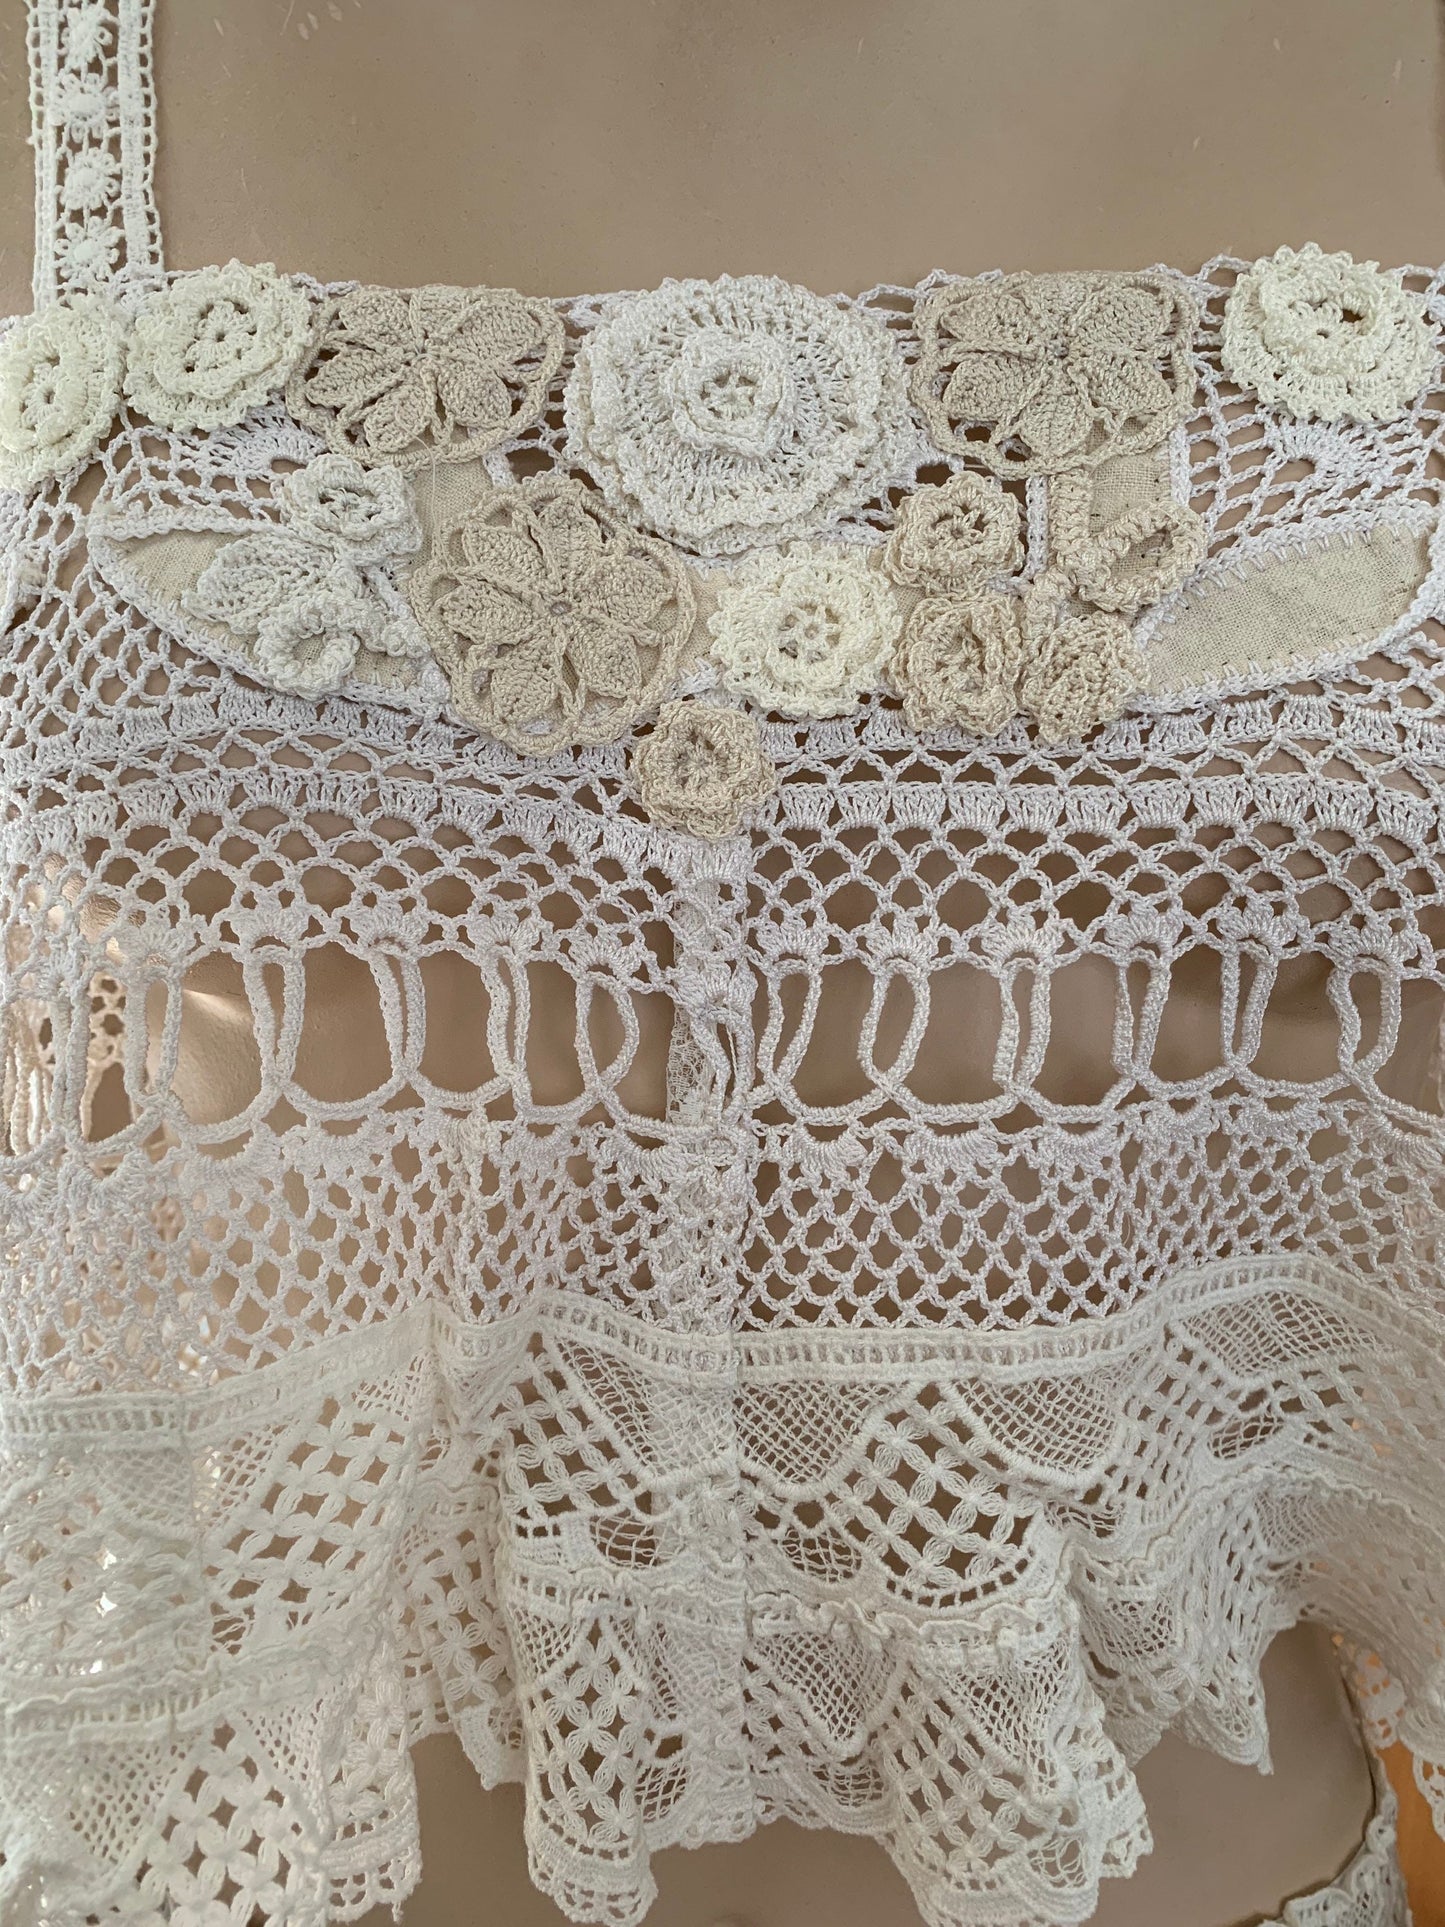 Hand Crochet, Lace, and Raw Silk Floral and Leaf Motif Cover-Up, Top and Mini Skirt Set